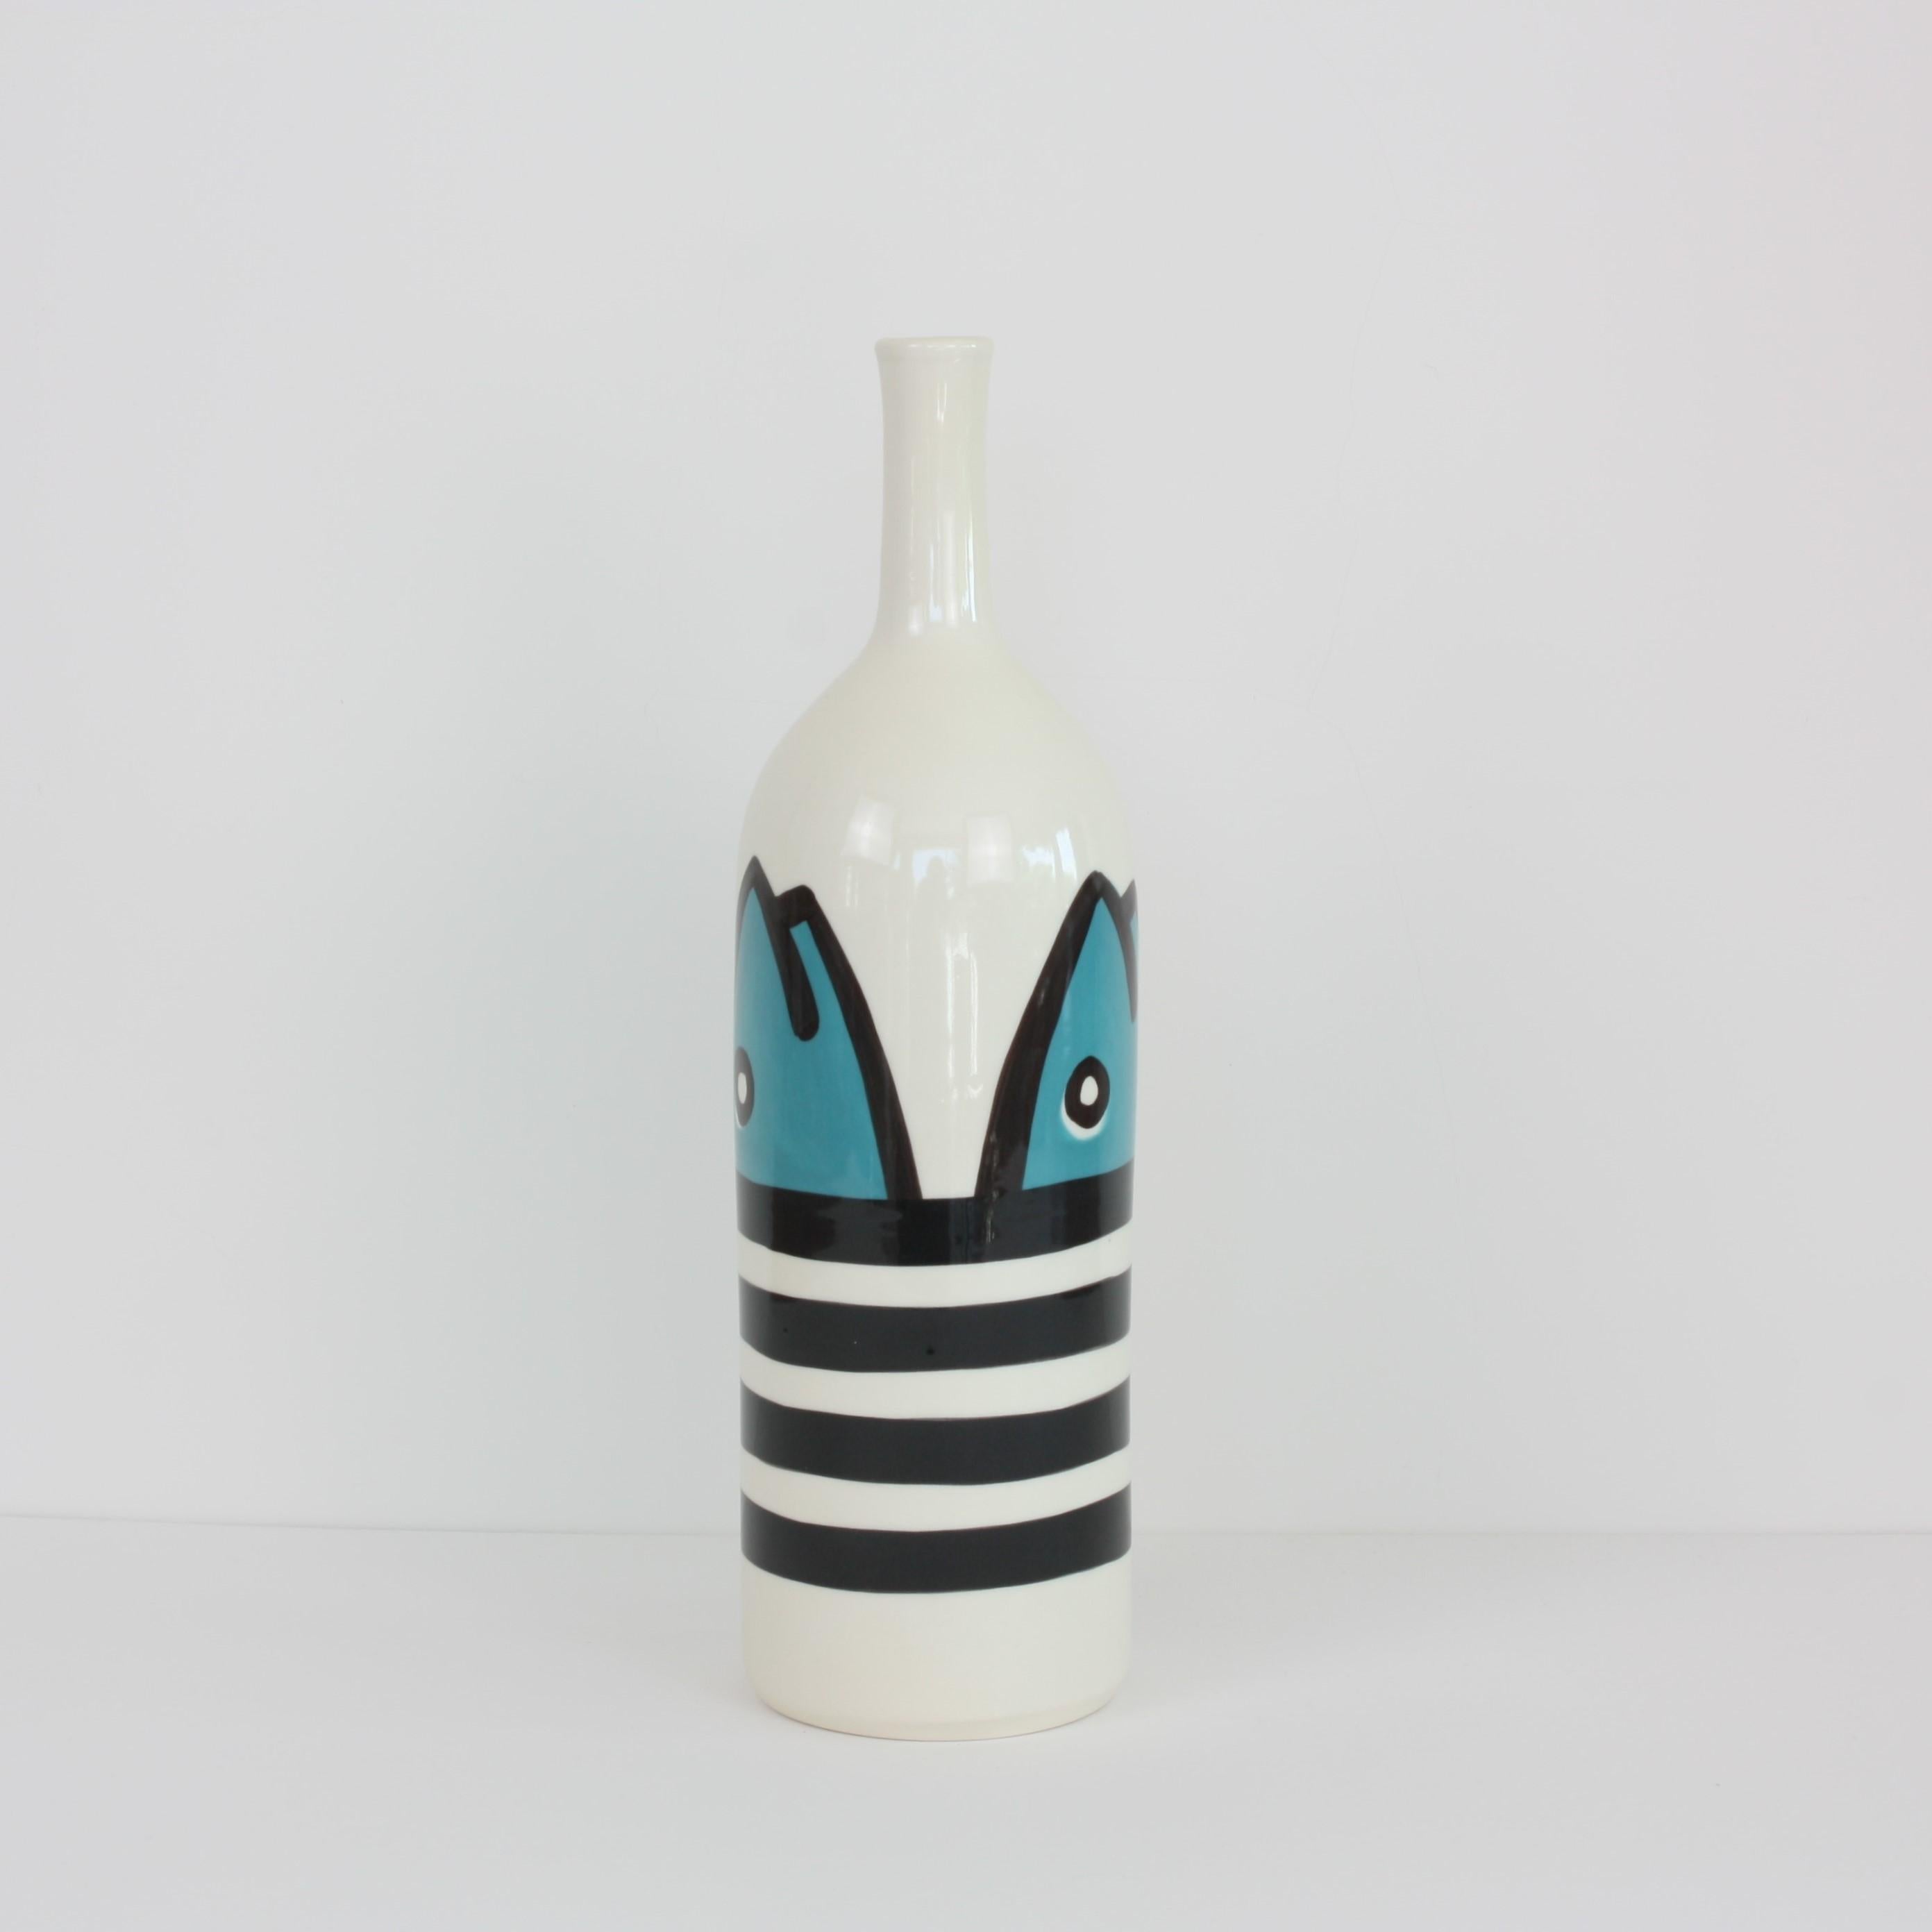 French Set of 2 Contemporary Ceramic Bottles with Nautical Motifs, Marinière